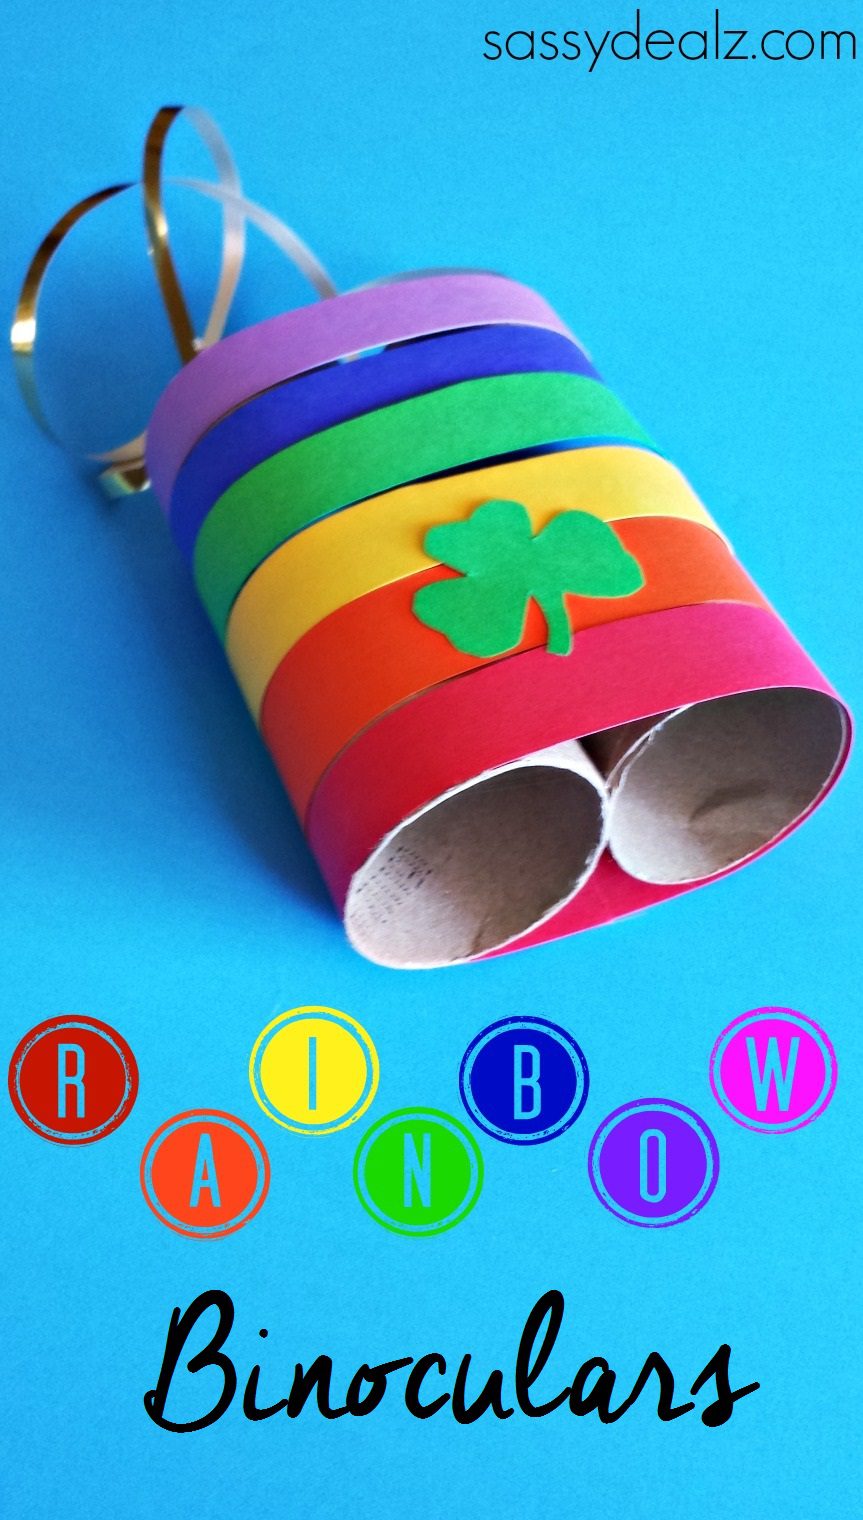 Binoculars are made from two toilet paper rolls covered in rainbow colored paper.